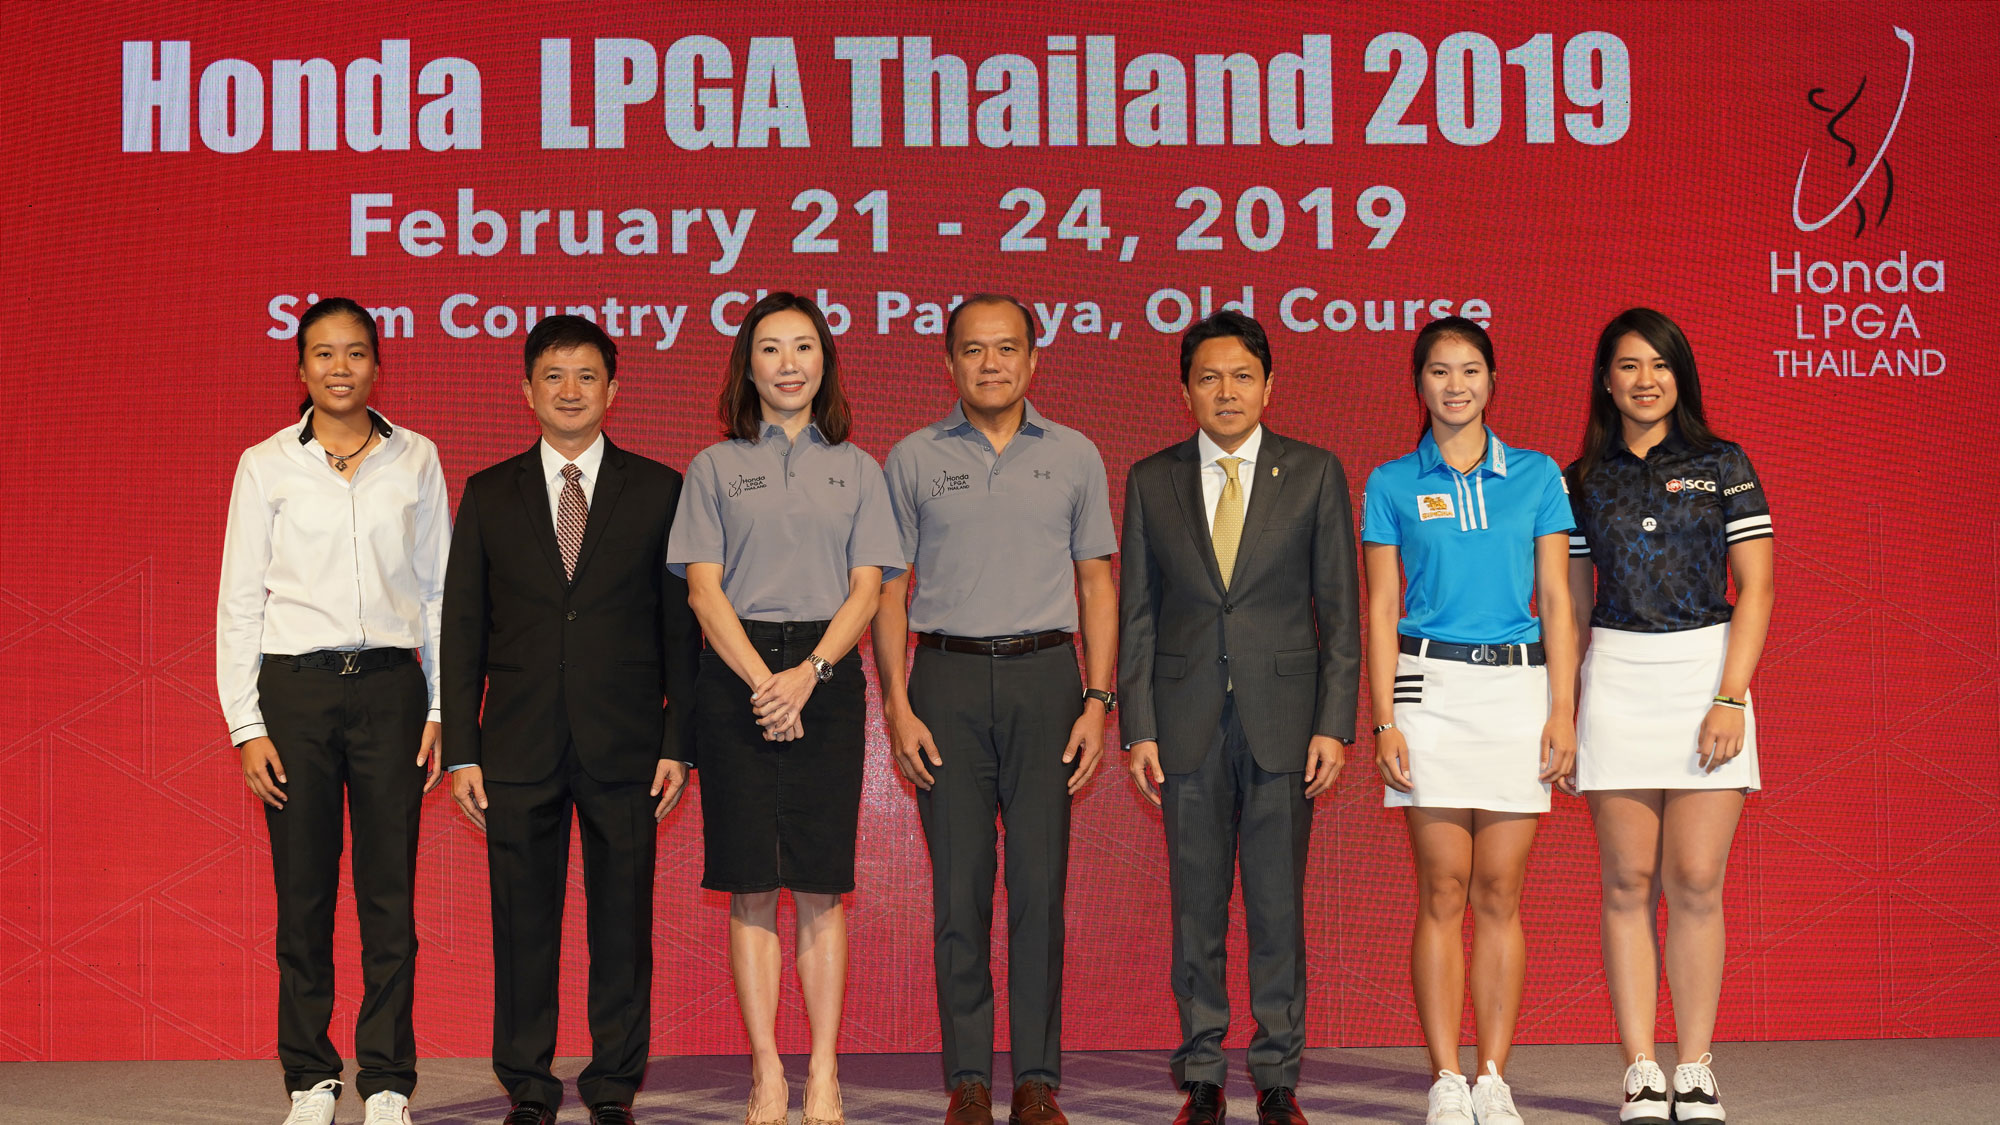 Pitak Pruittisarikorn (Middle), Chief Operating Officer of Honda Automobile (Thailand) Co., Ltd. together with Winnie Heng (3rd from left), Vice President and Managing Director of IMG Thailand; Tanukiat Janchum (2nd from left), Director of Professional Sports Development and Boxing Department, Sports Authority of Thailand (SAT); Tanes Petsuwan (3rd   from right), Deputy Governor for Marketing Communications, Tourism Authority of Thailand, recently attended a 2nd  Press Conference of the Honda LPGA Thailand 2019. Joining the event by Thai professional golfers including Gift - Benyapa Niphatsophon (left); Saipan - Pannarat Thanapolboonyaras (2nd from right) and Meow - Pajaree Anannarukarn (right) at Park Hyatt Bangkok.